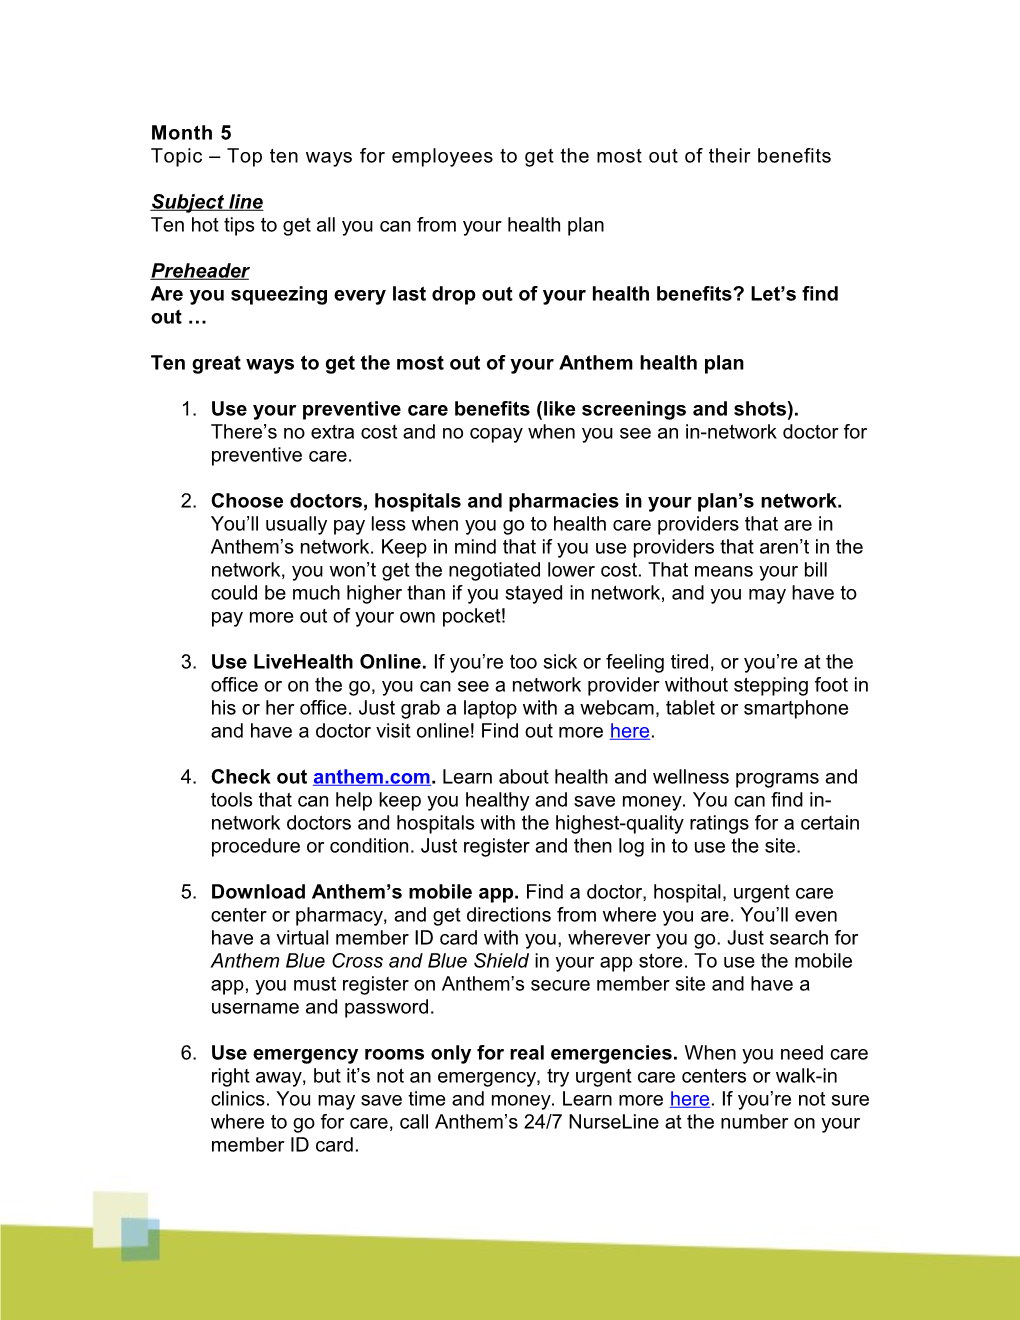 Ten Hot Tips to Get All You Can from Your Health Plan